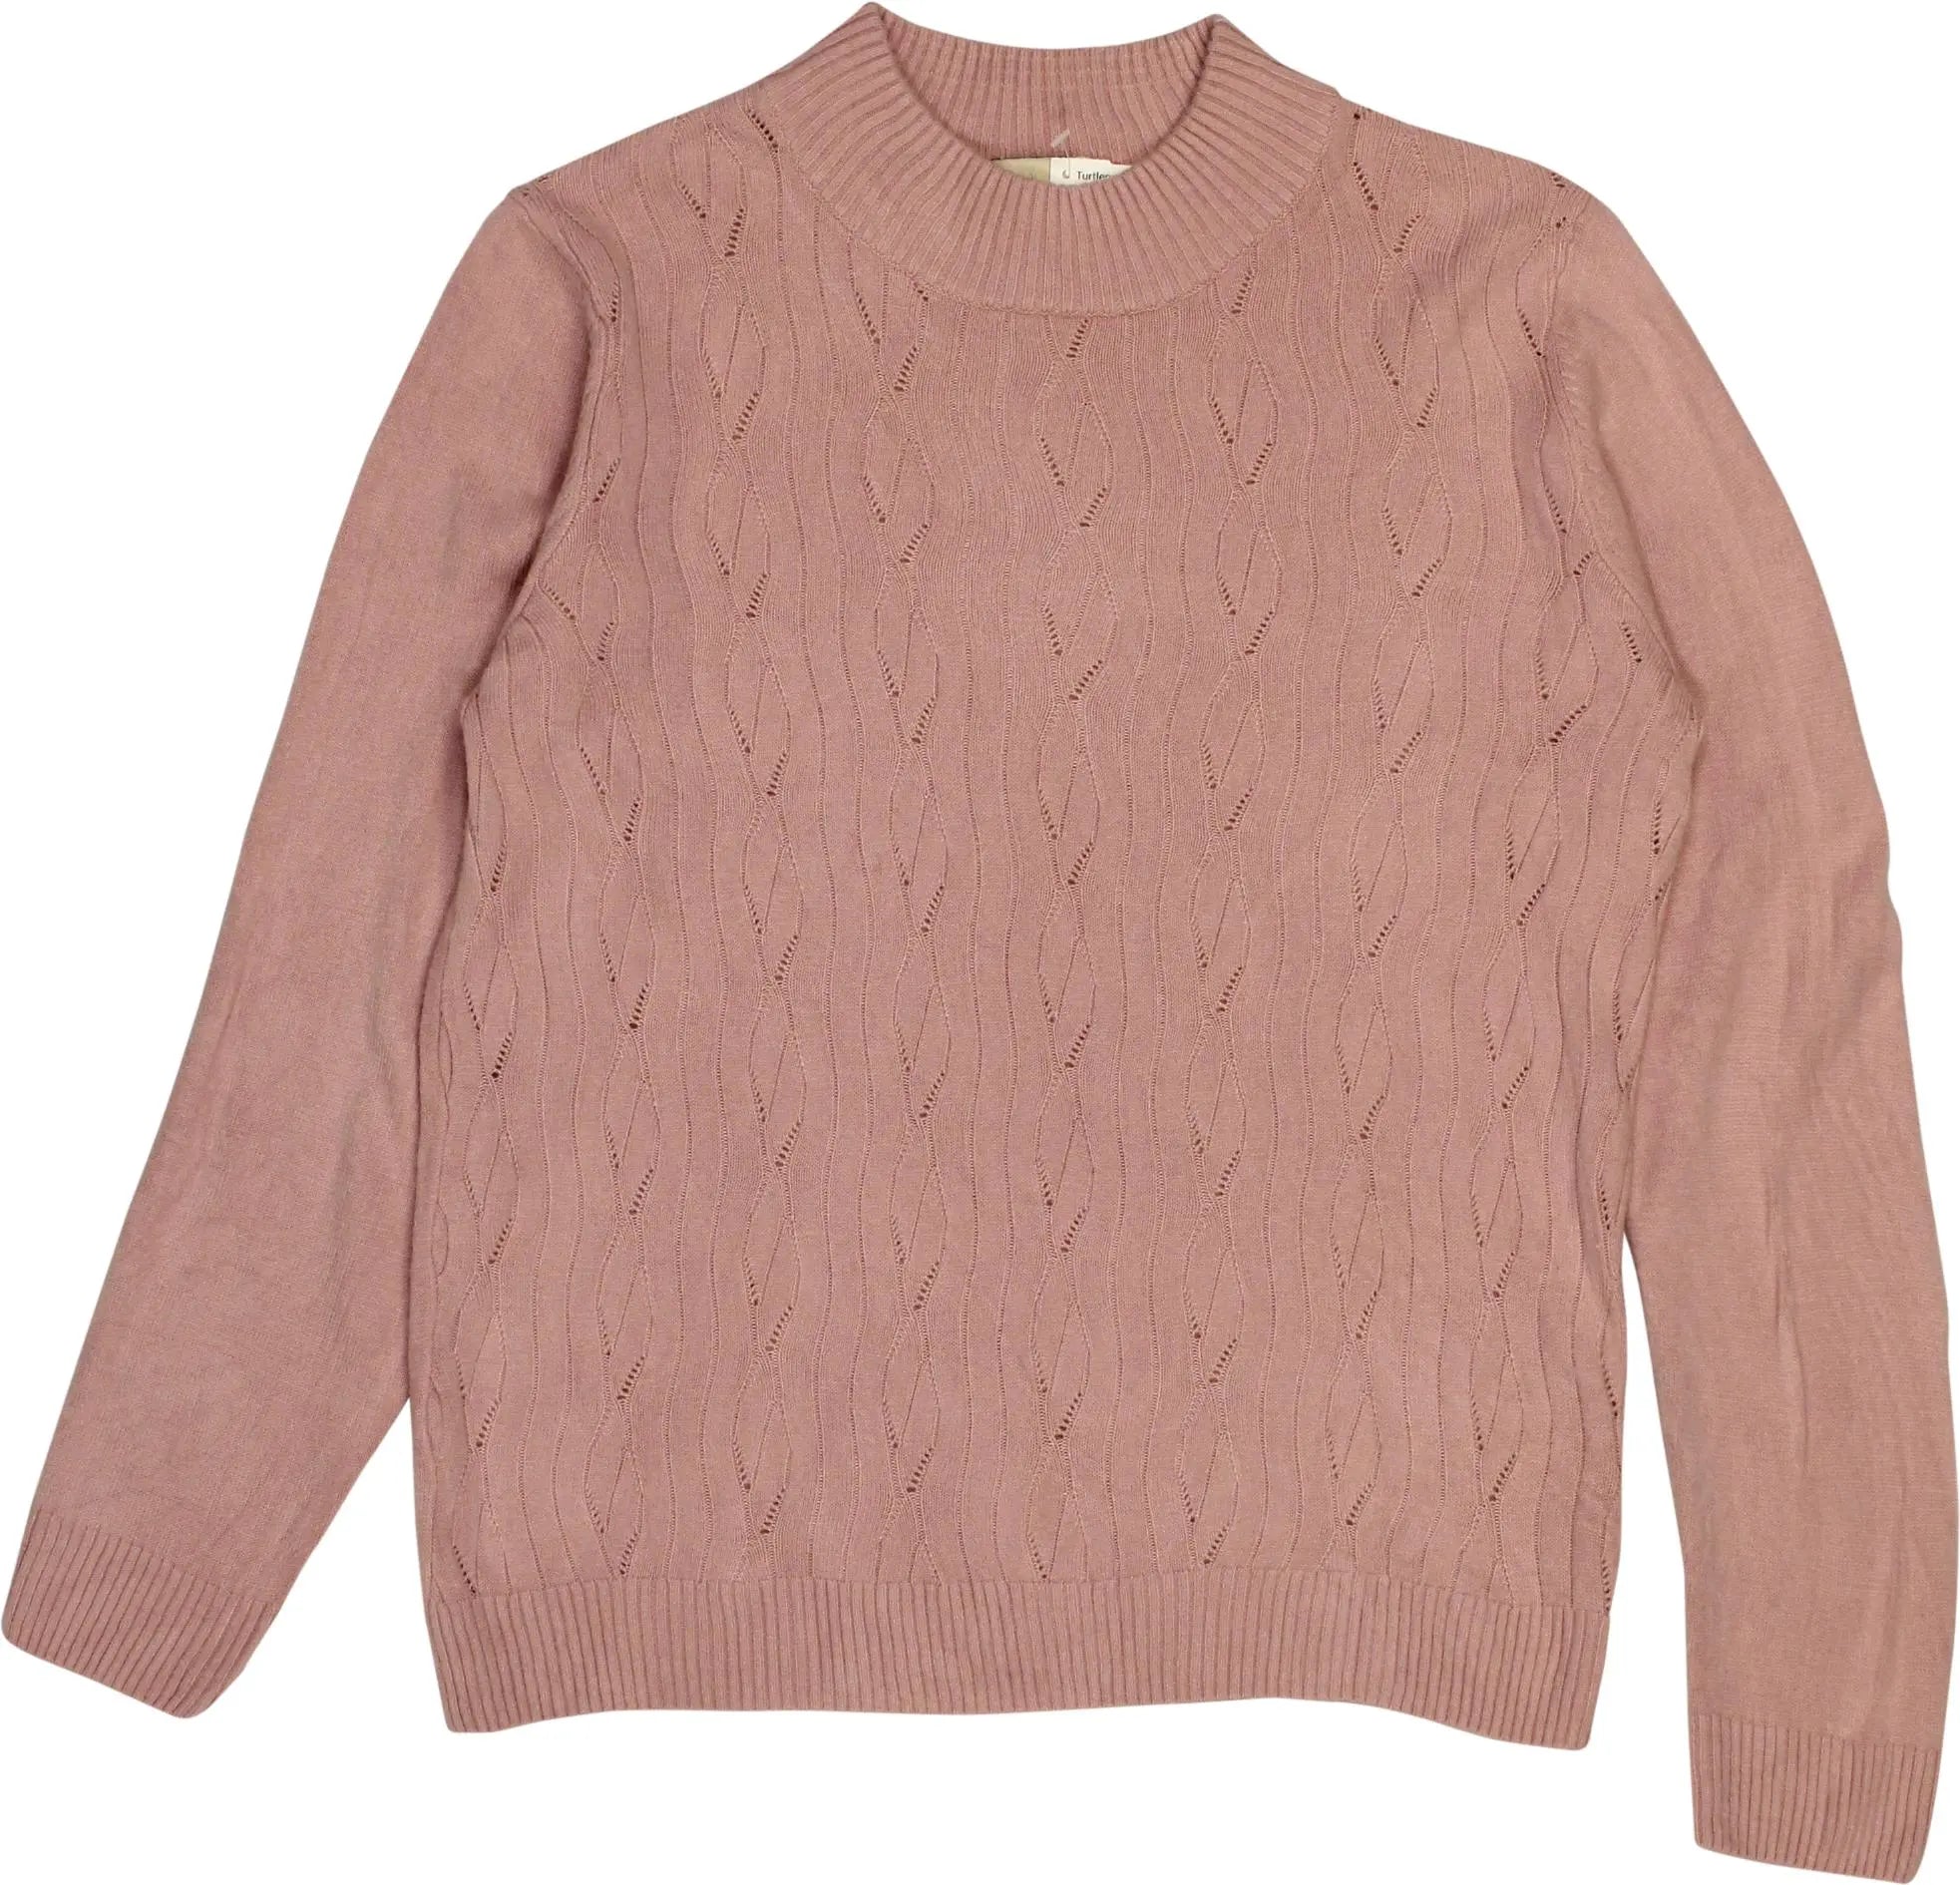 Tradition Petite - Pink jumper- ThriftTale.com - Vintage and second handclothing